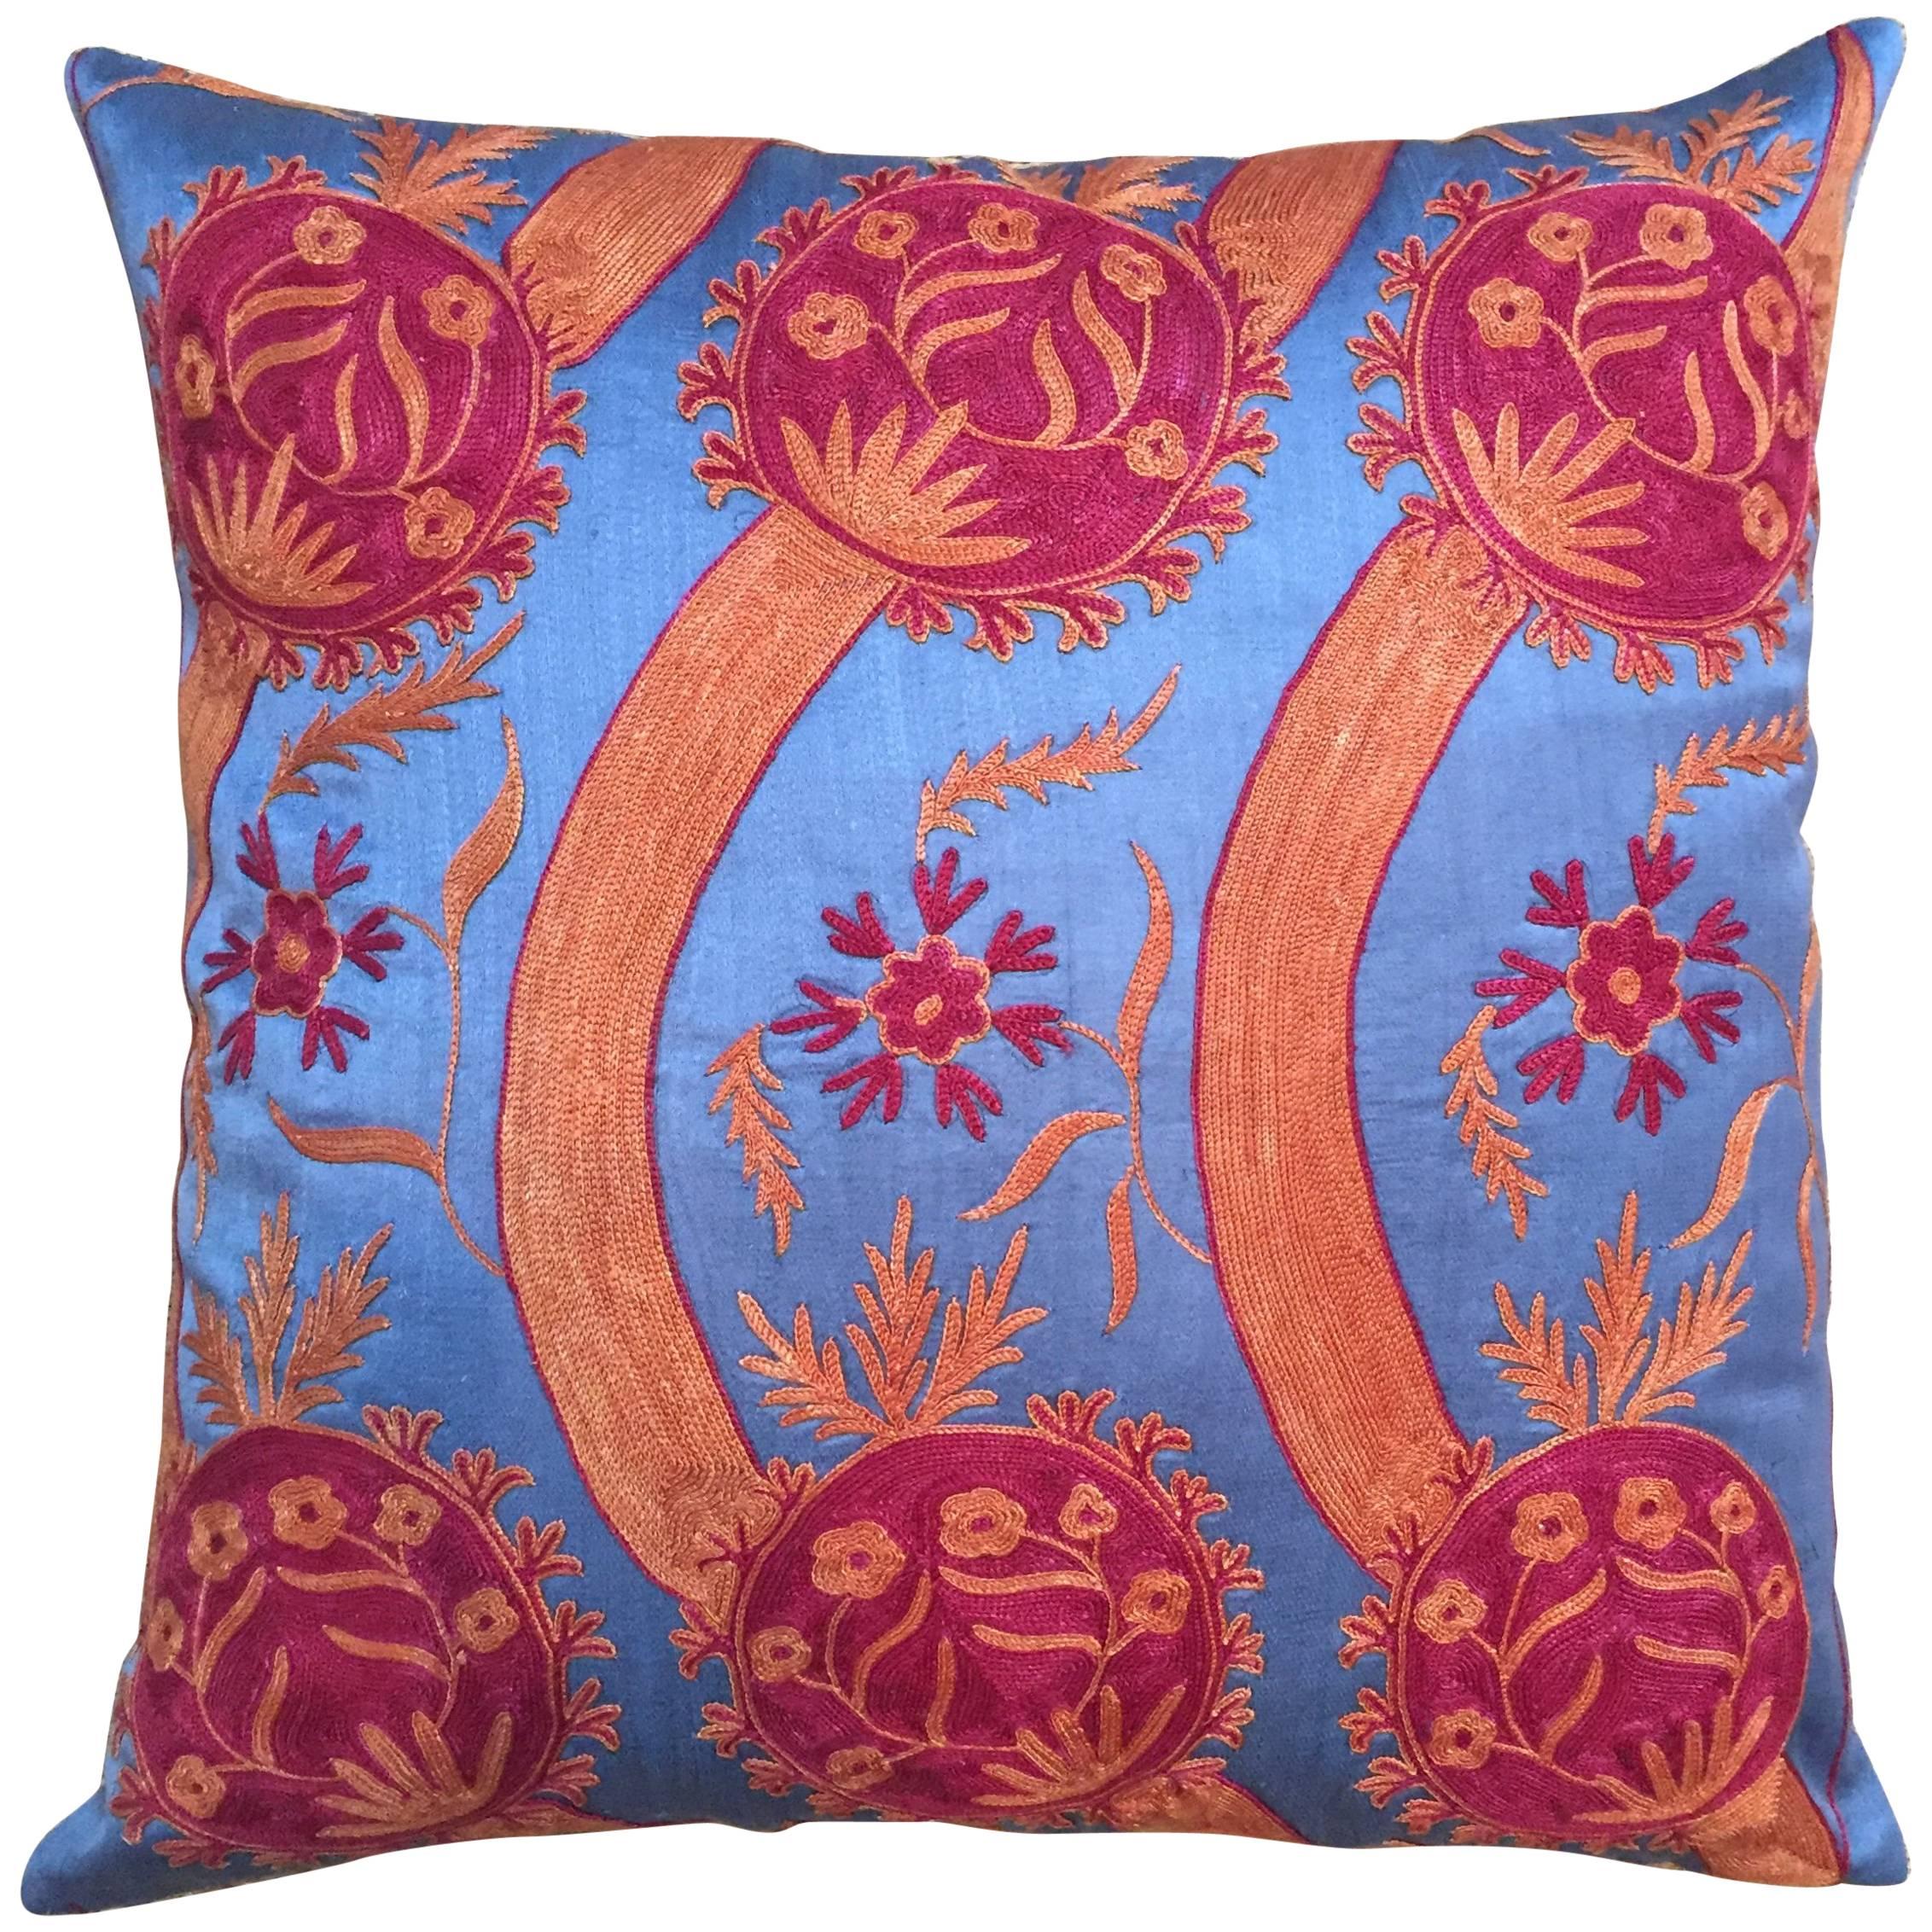 Throw Pillow from Turkey Hand Embroidered and Designed by Michelle Nussbaumer